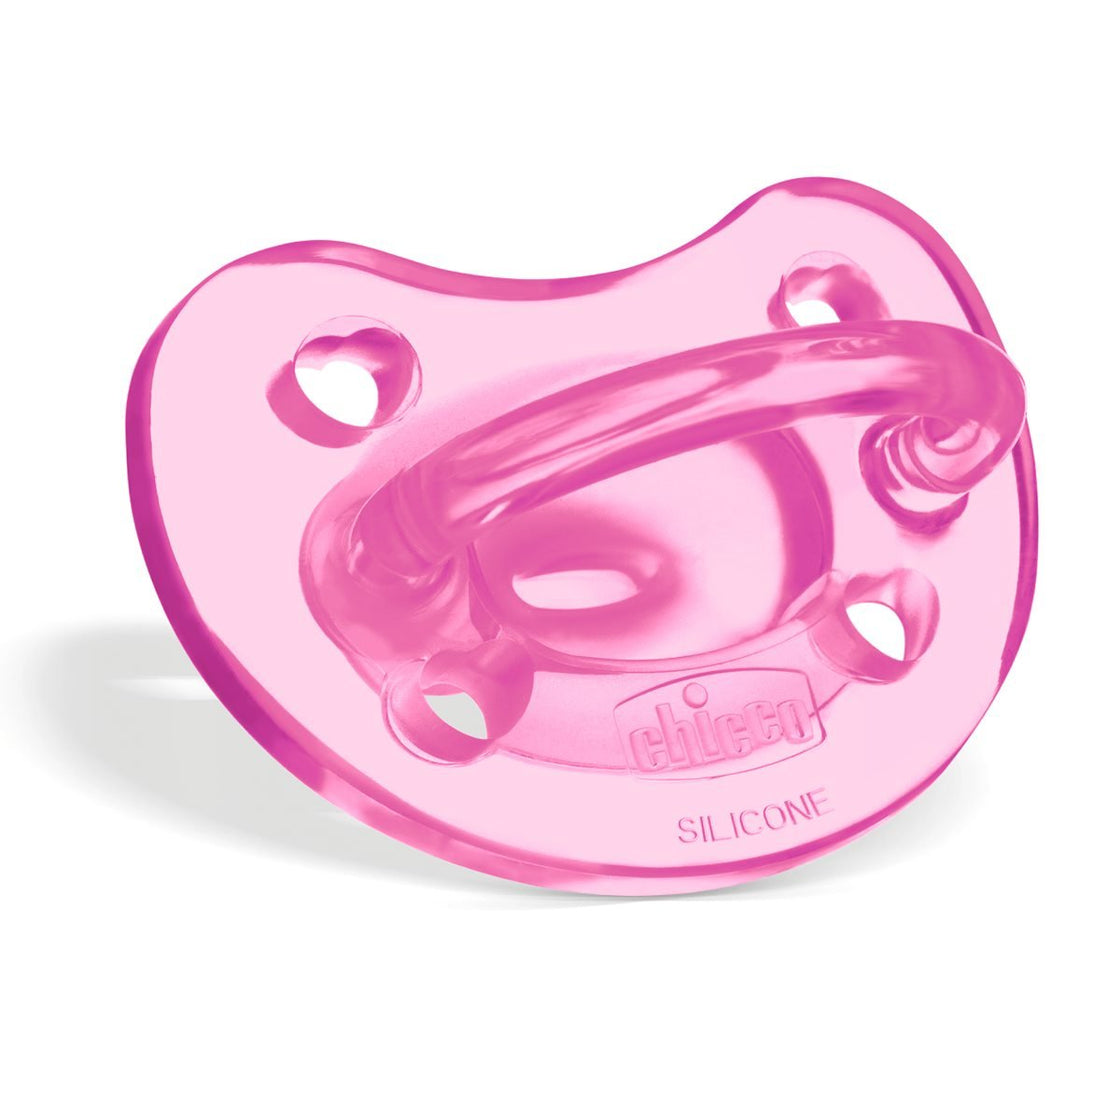 Chicco Physio Soft Baby Soother with Unique Shape to Support Psychological Breathing, Teether & Pacifier for Newborns, BPA Free, 0-6m (Pink)